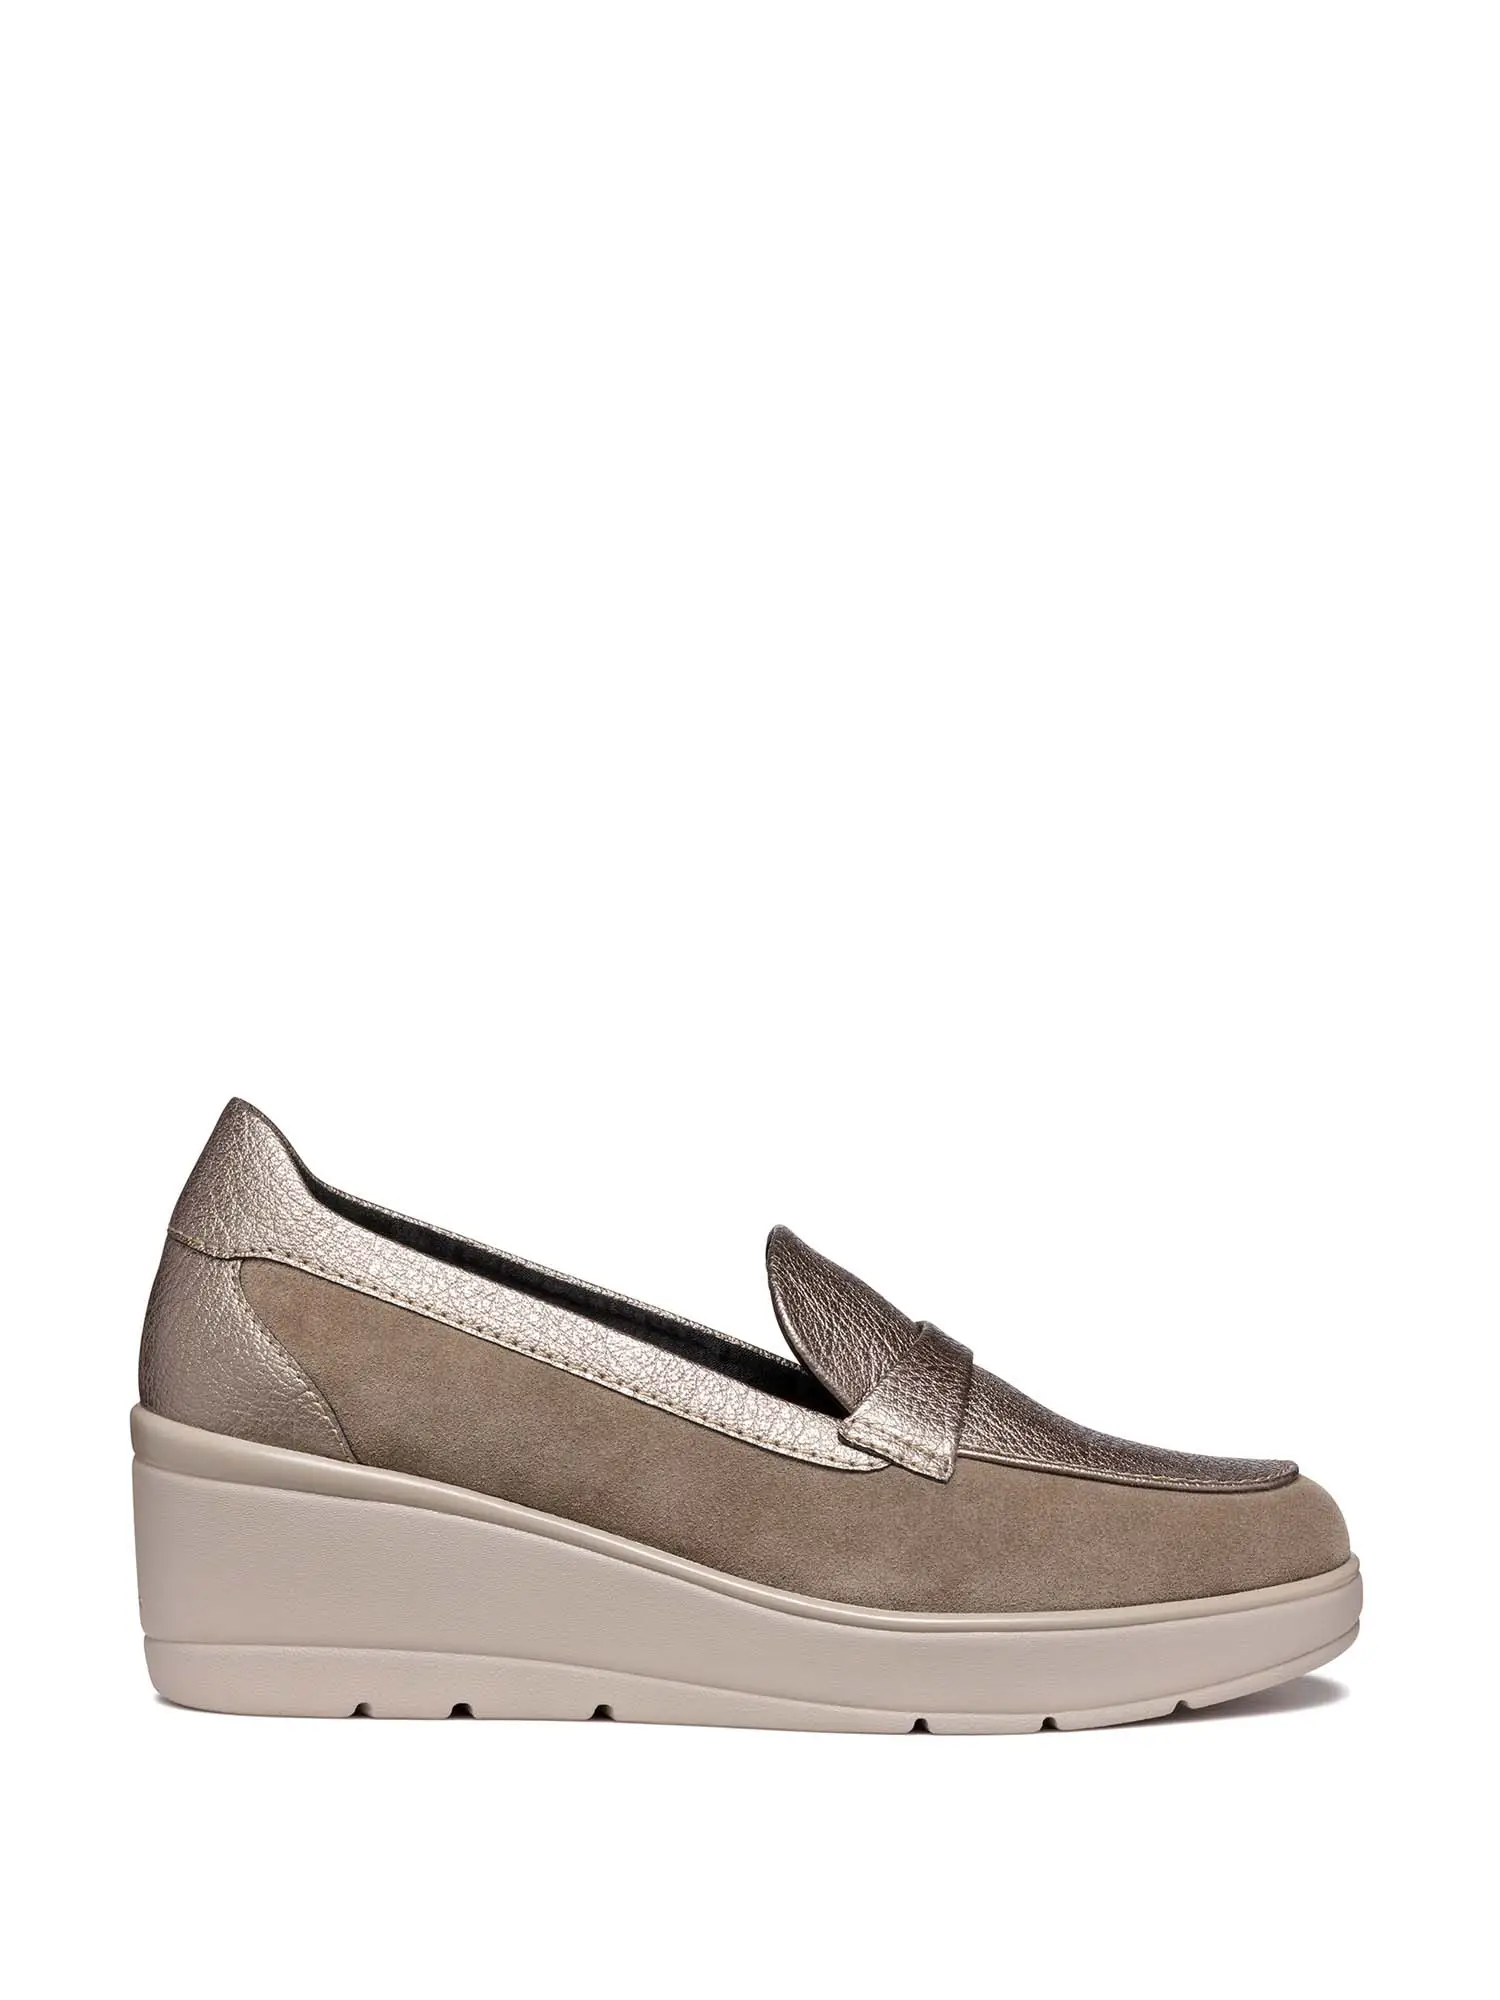 MOCASSINO DONNA - GEOX - D46RAB 0222N - TAUPE, 35